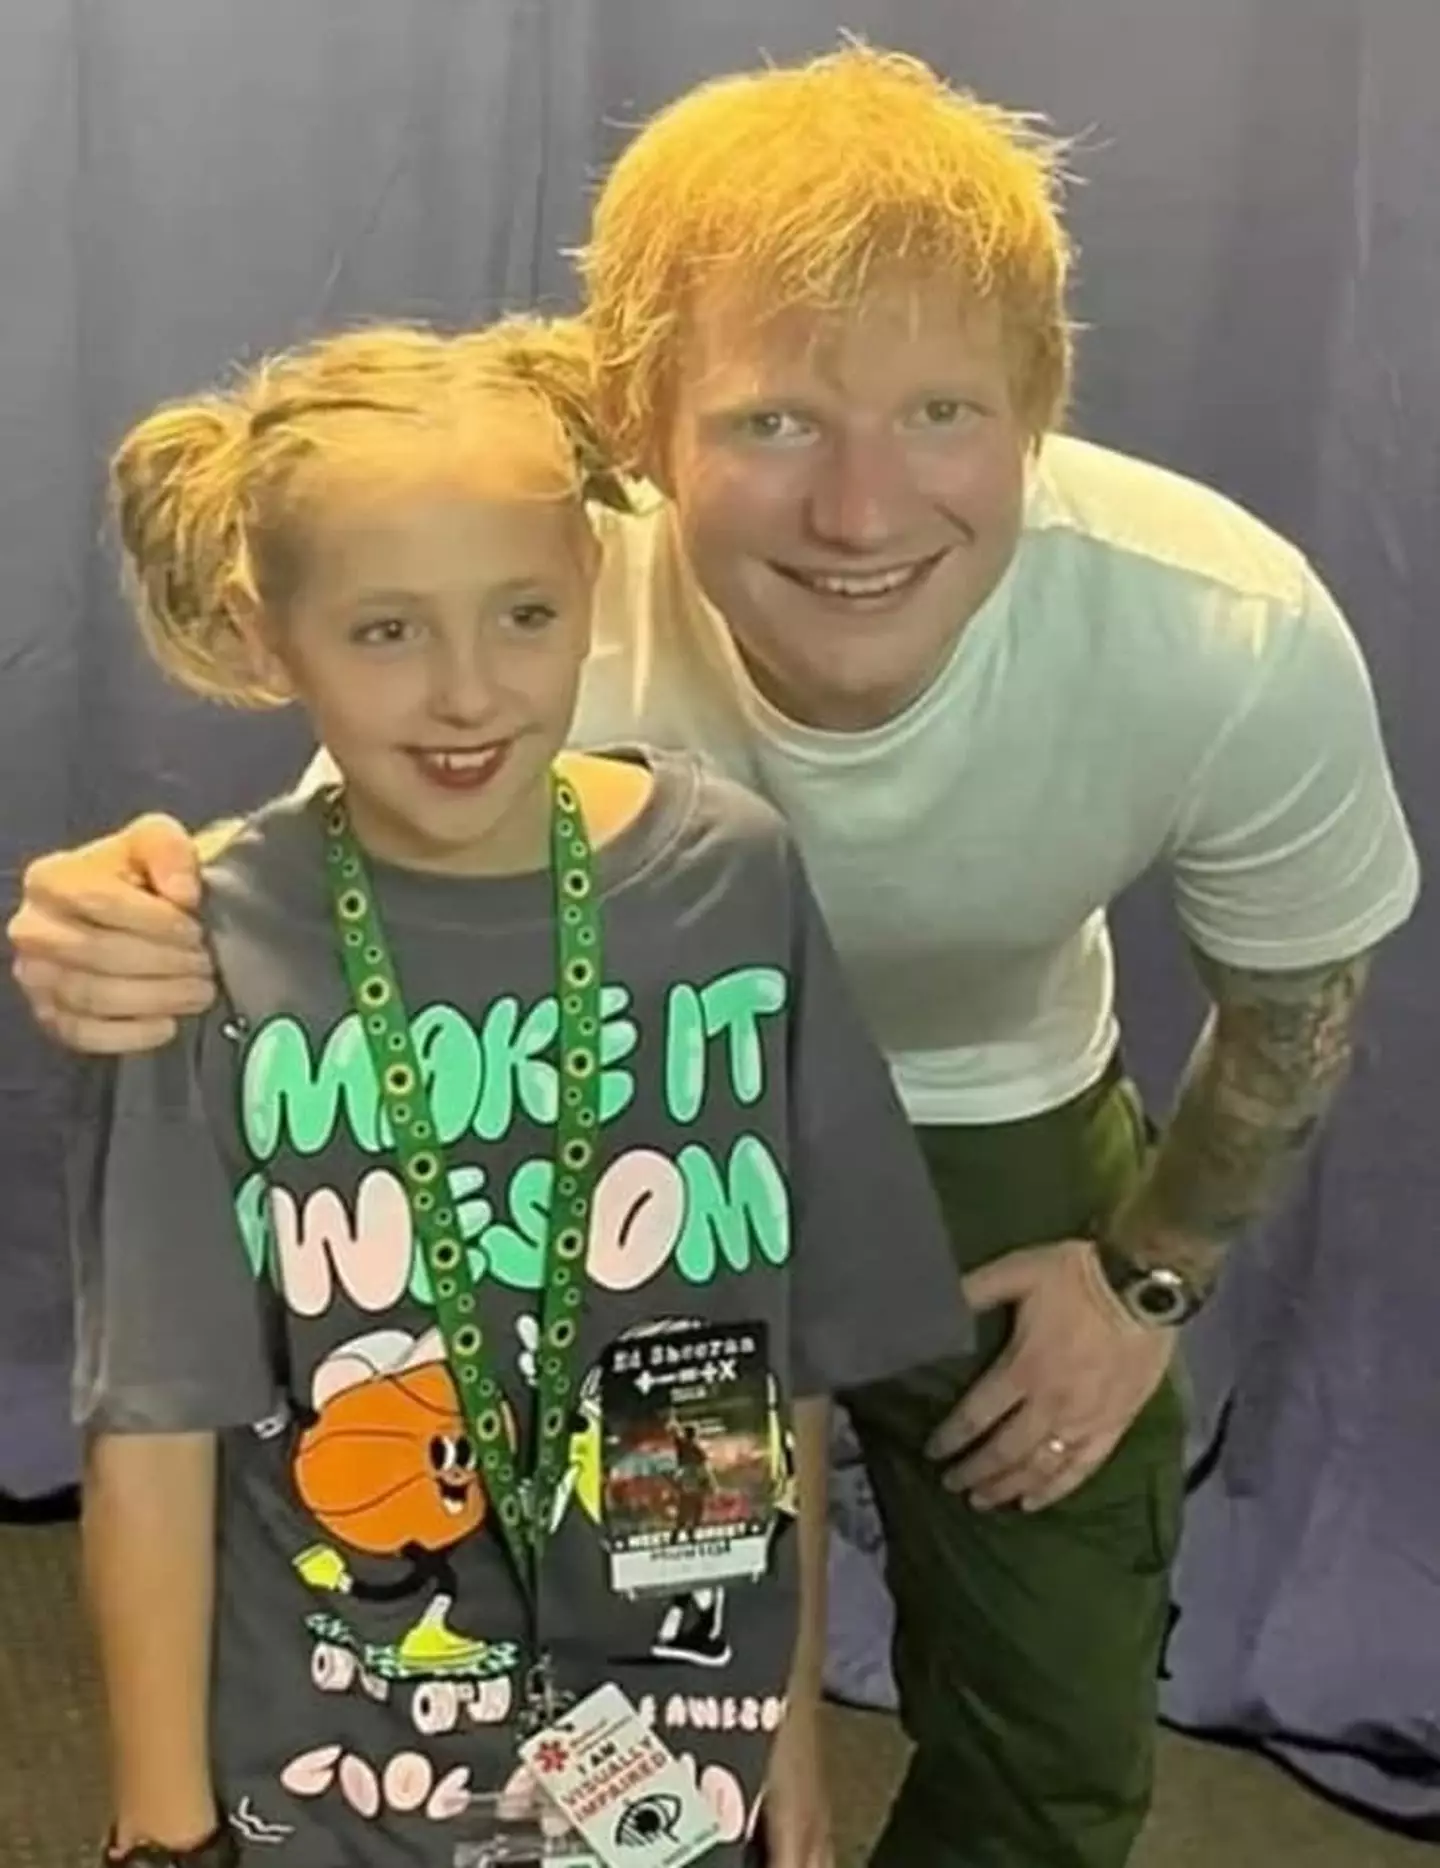 Caitlin was able to meet one of her idols, Ed Sheeran.